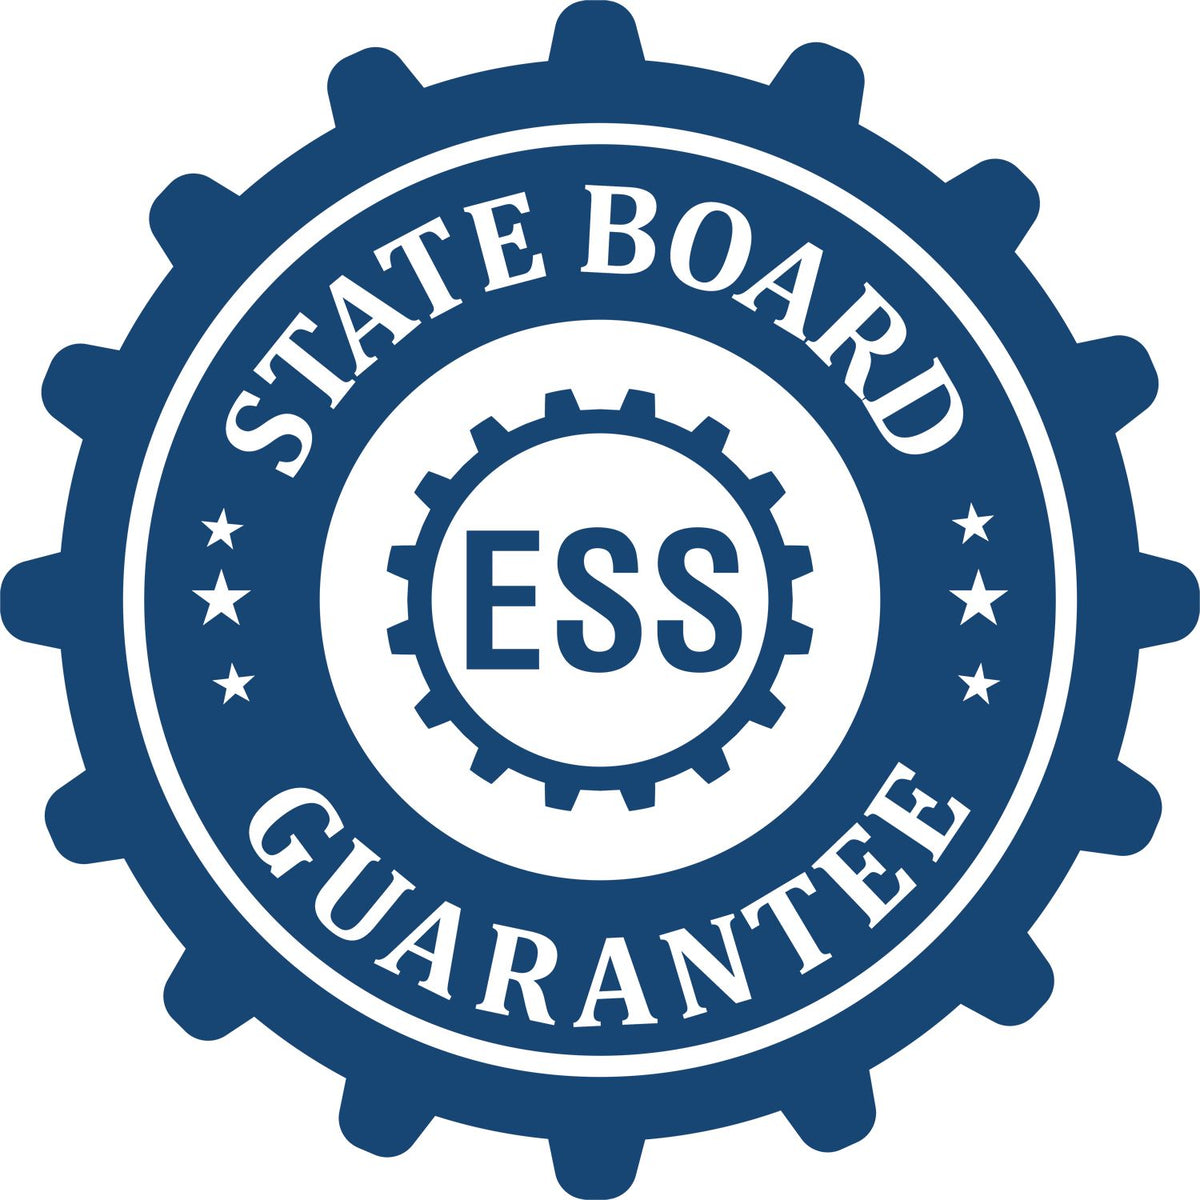 An emblem in a gear shape illustrating a state board guarantee for the Washington Engineer Desk Seal product.